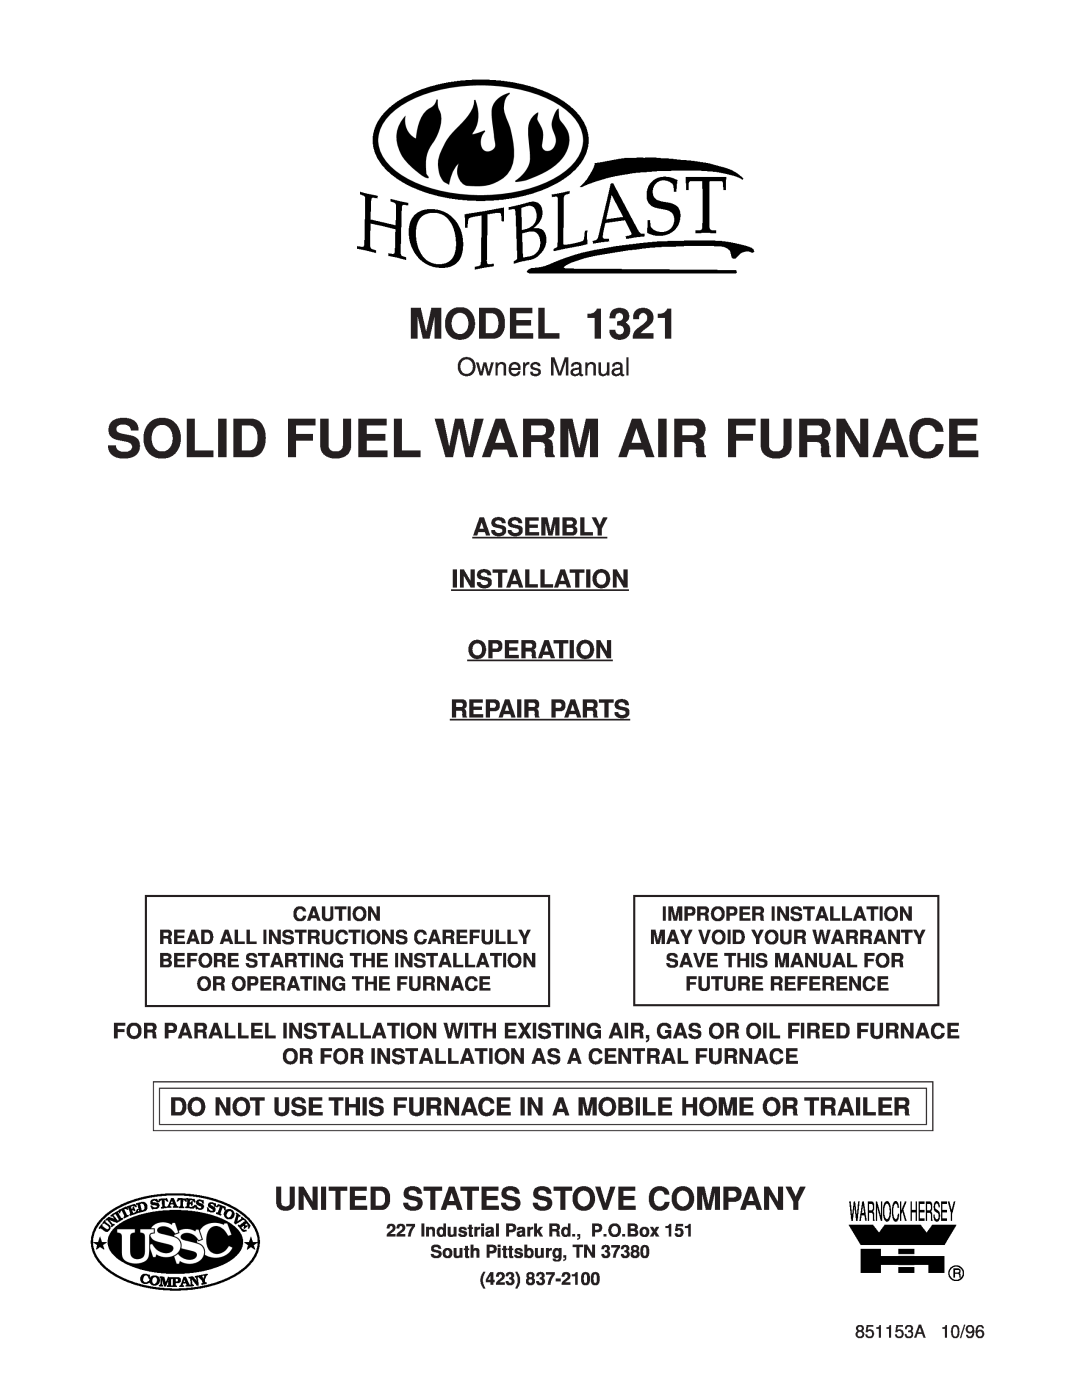 United States Stove 1321 warranty Solid Fuel Warm Air Furnace, Ussc, Model, Assembly Installation Operation Repair Parts 